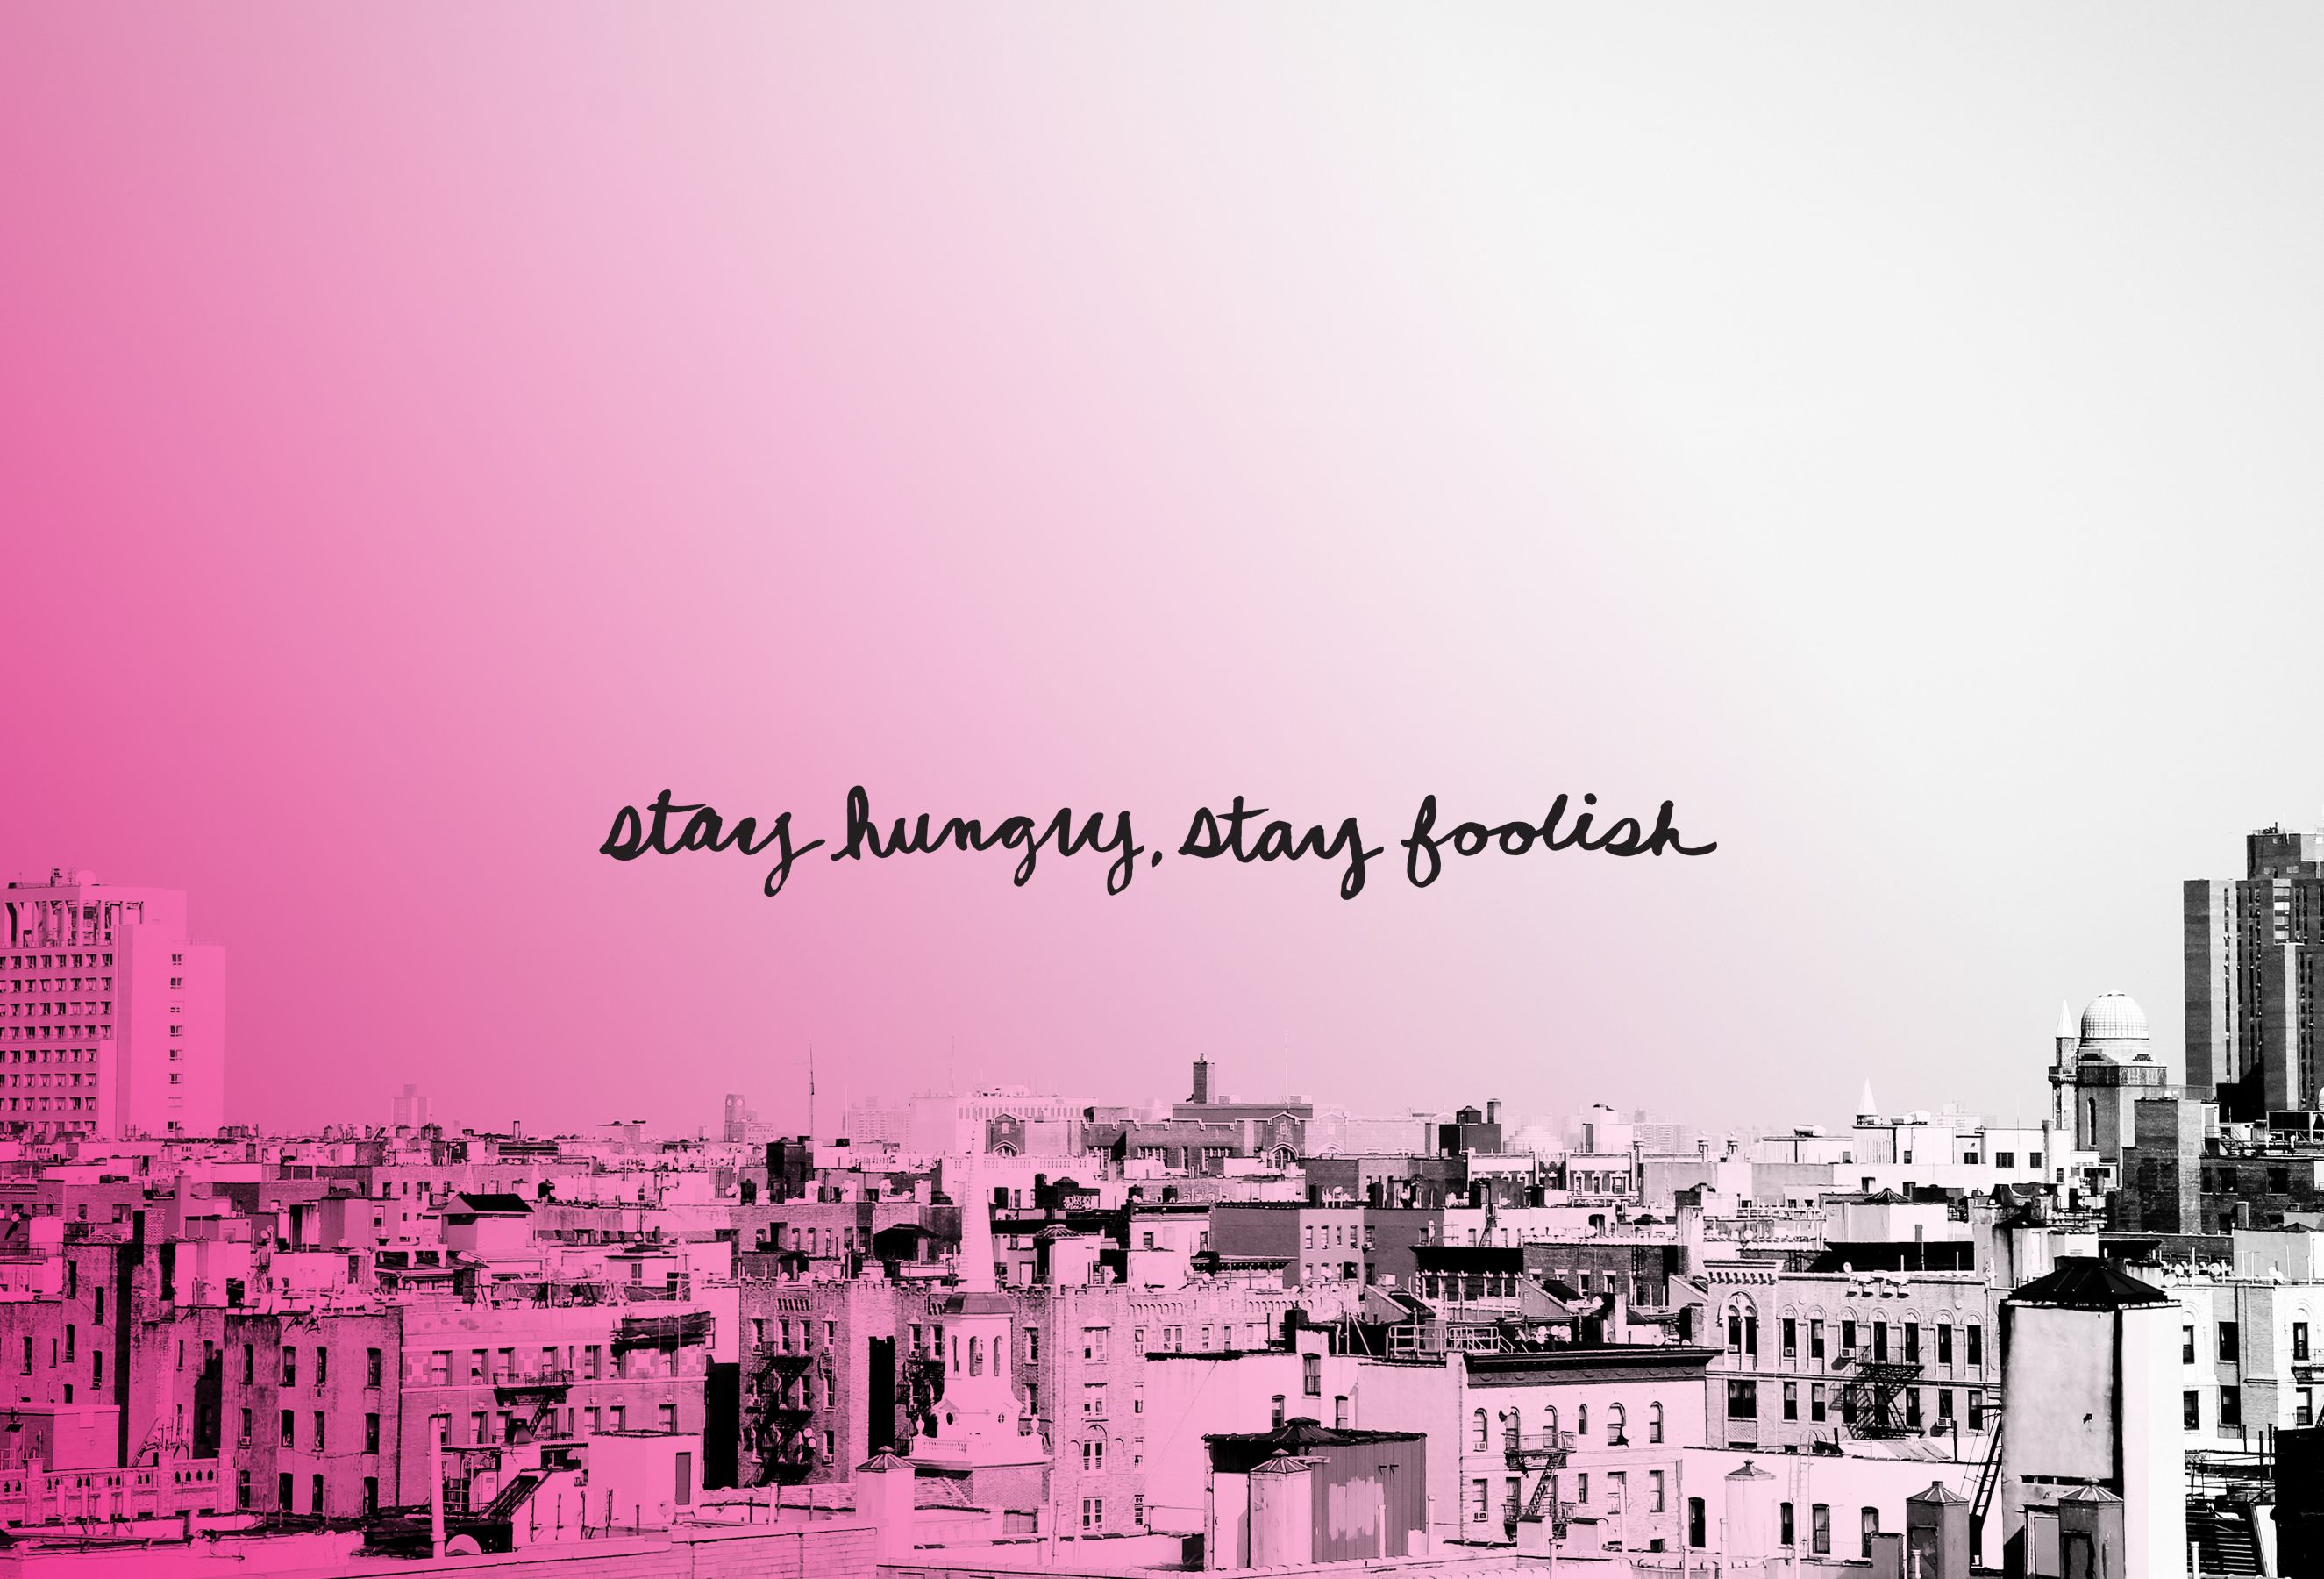 Aesthetic Quotes Pink Wallpapers